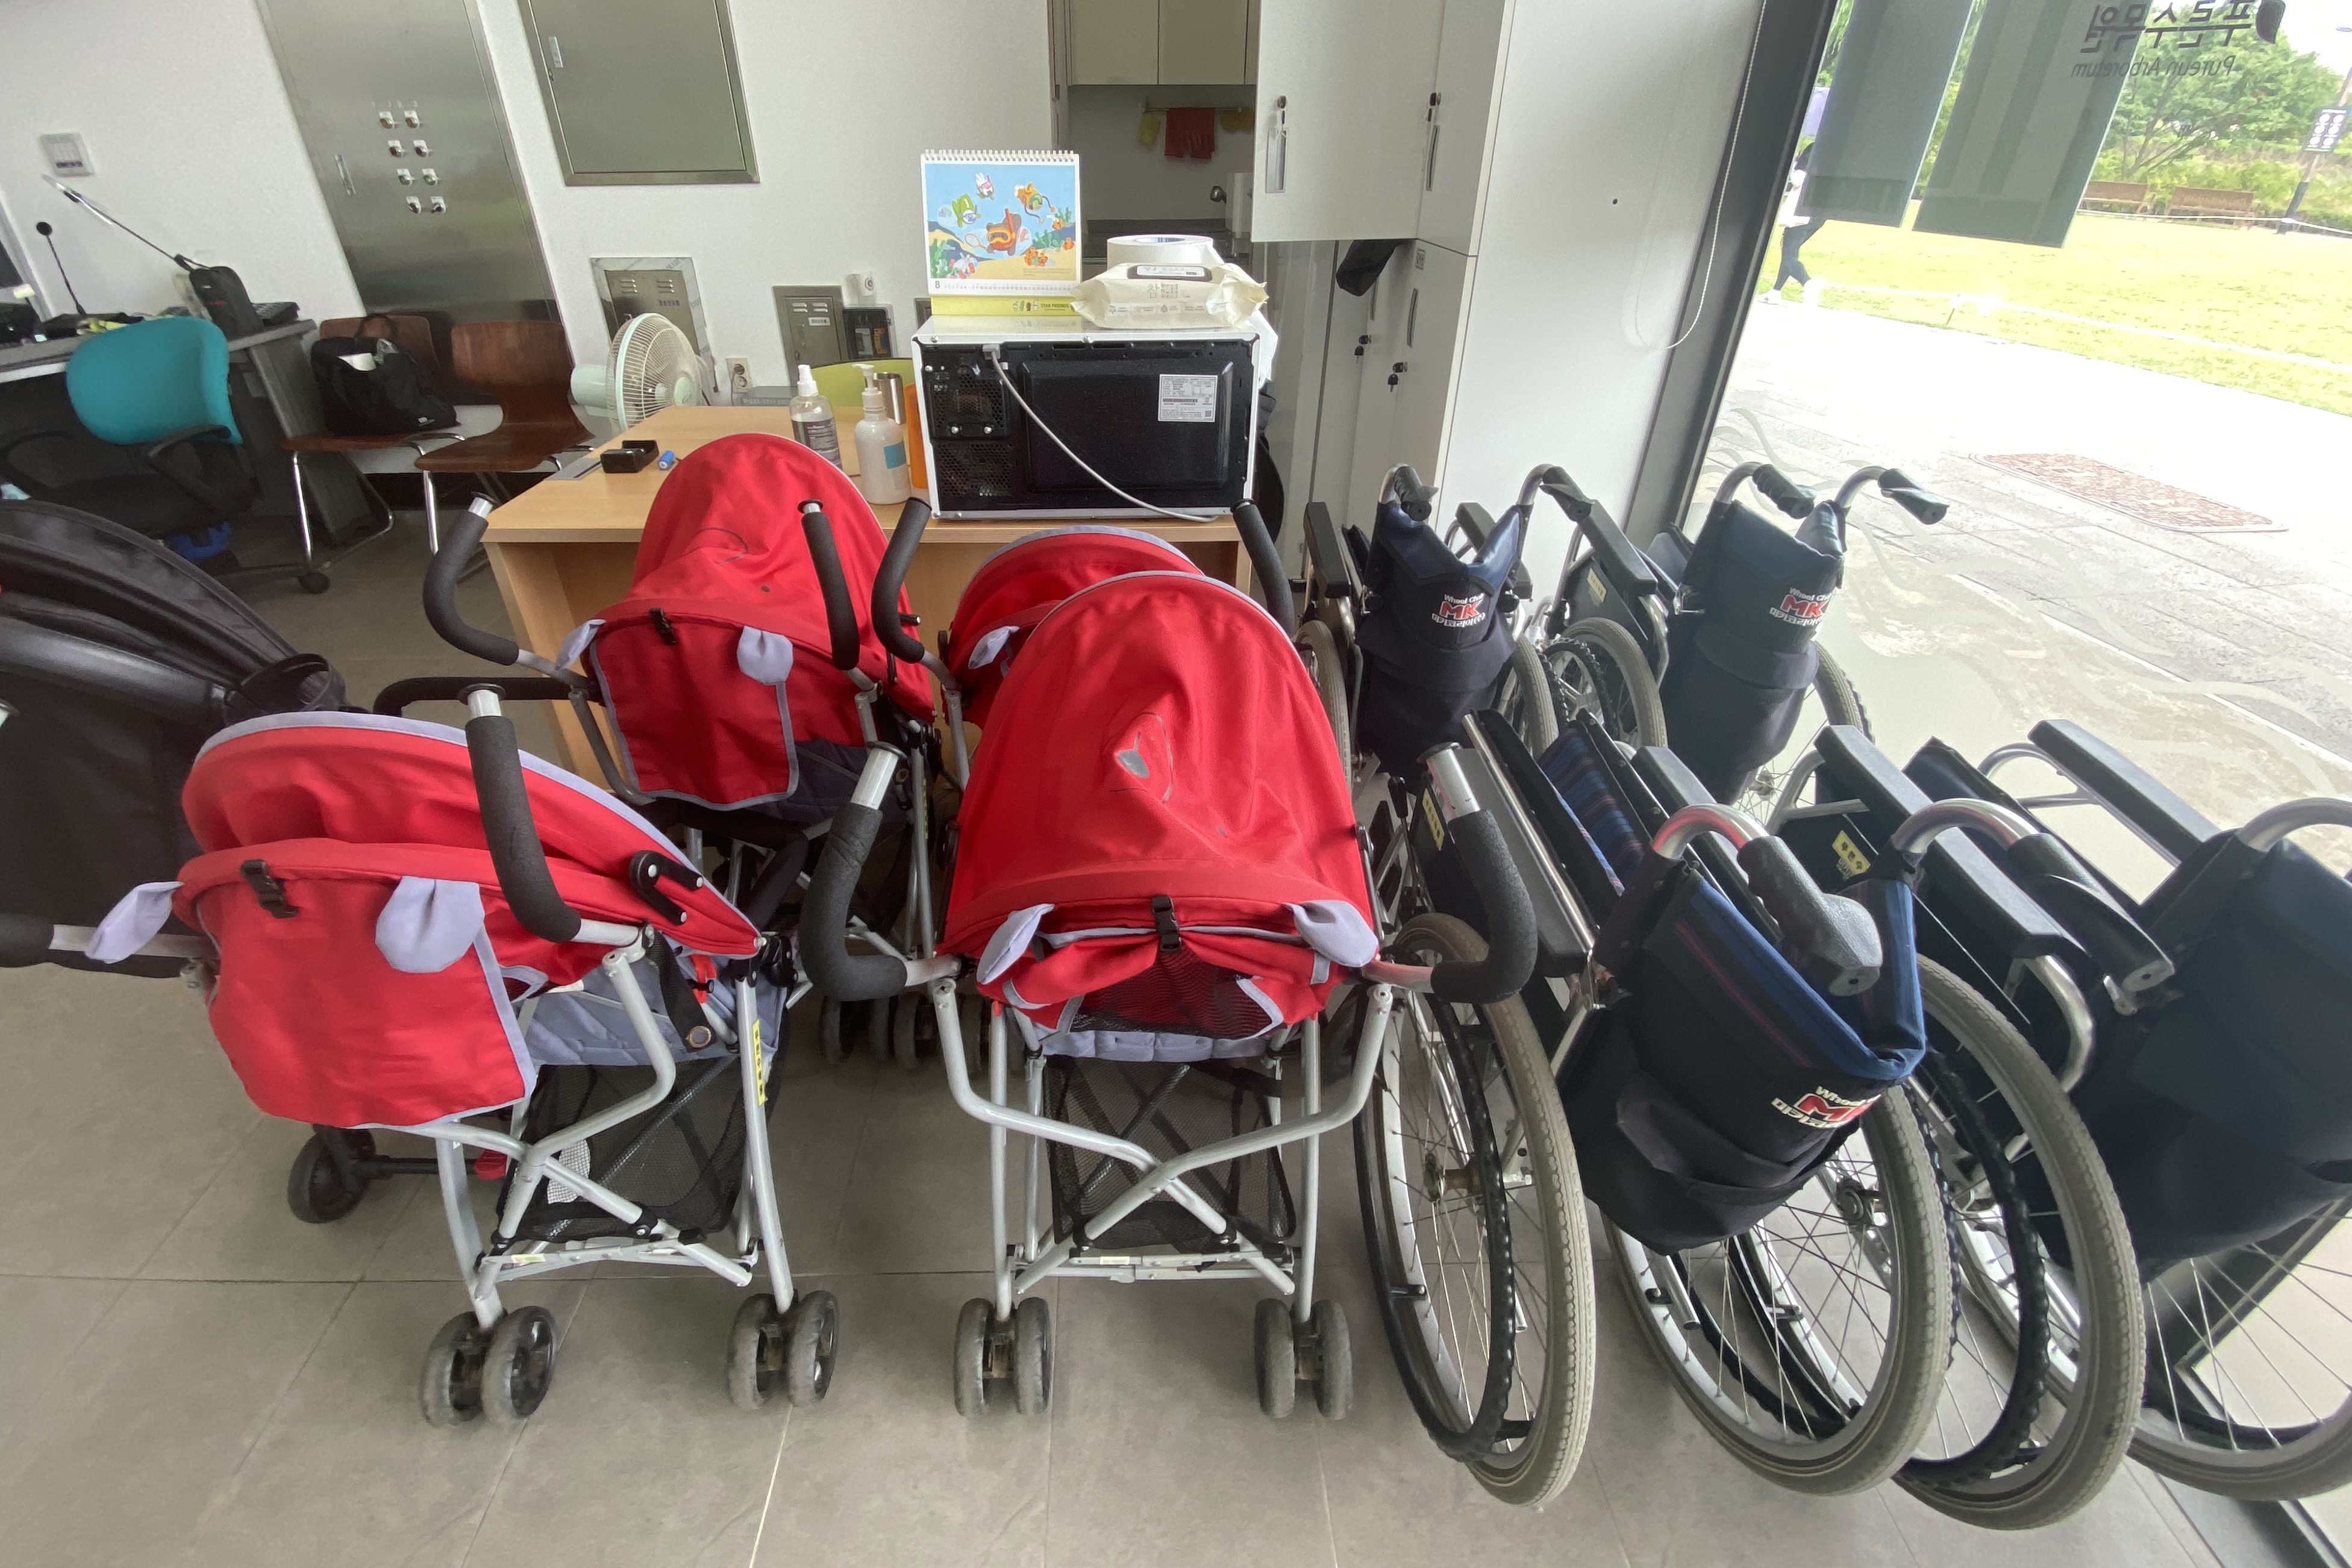 Guide map and information desk0 : Stroller and wheelchair rental place at Pureun Arboretum
